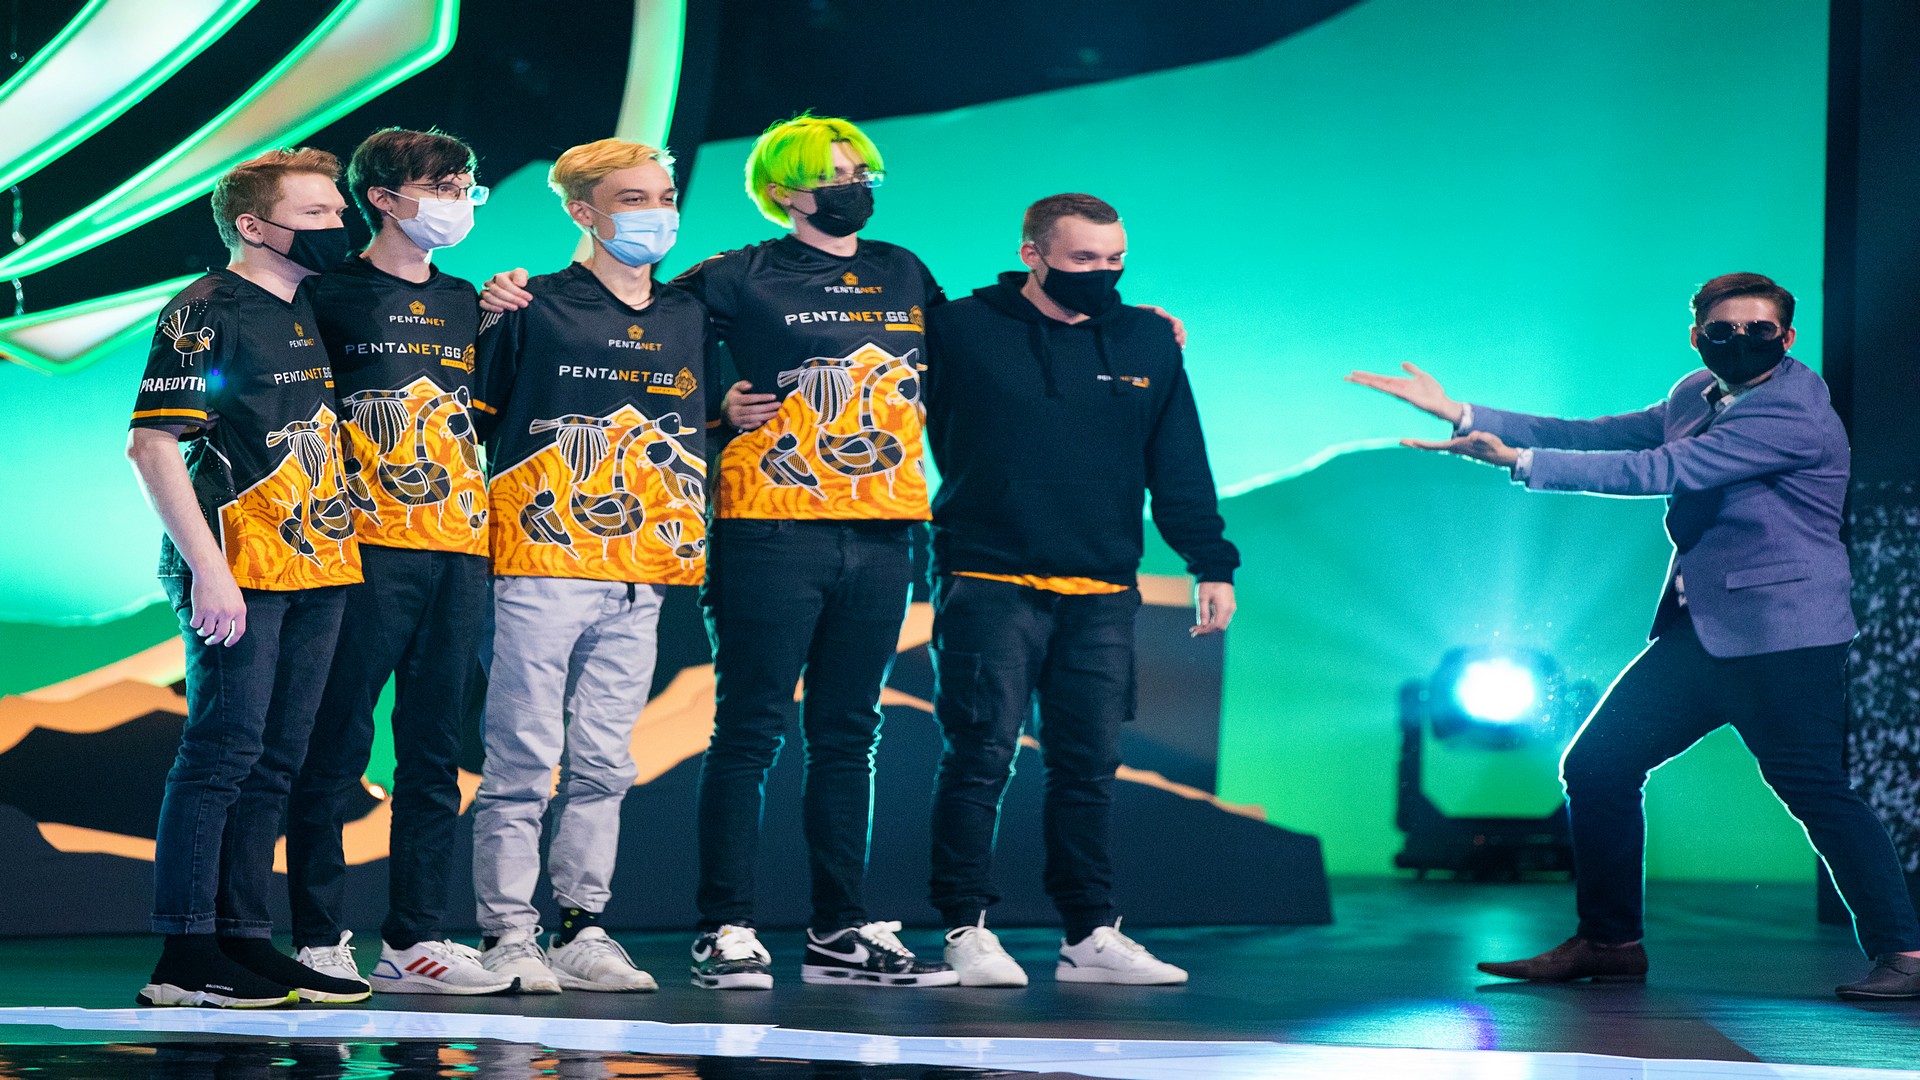 Perth-Based Pentanet.GG Become First Oceanic League of Legends Team To Make It Out Of Group Stages at International Tournament